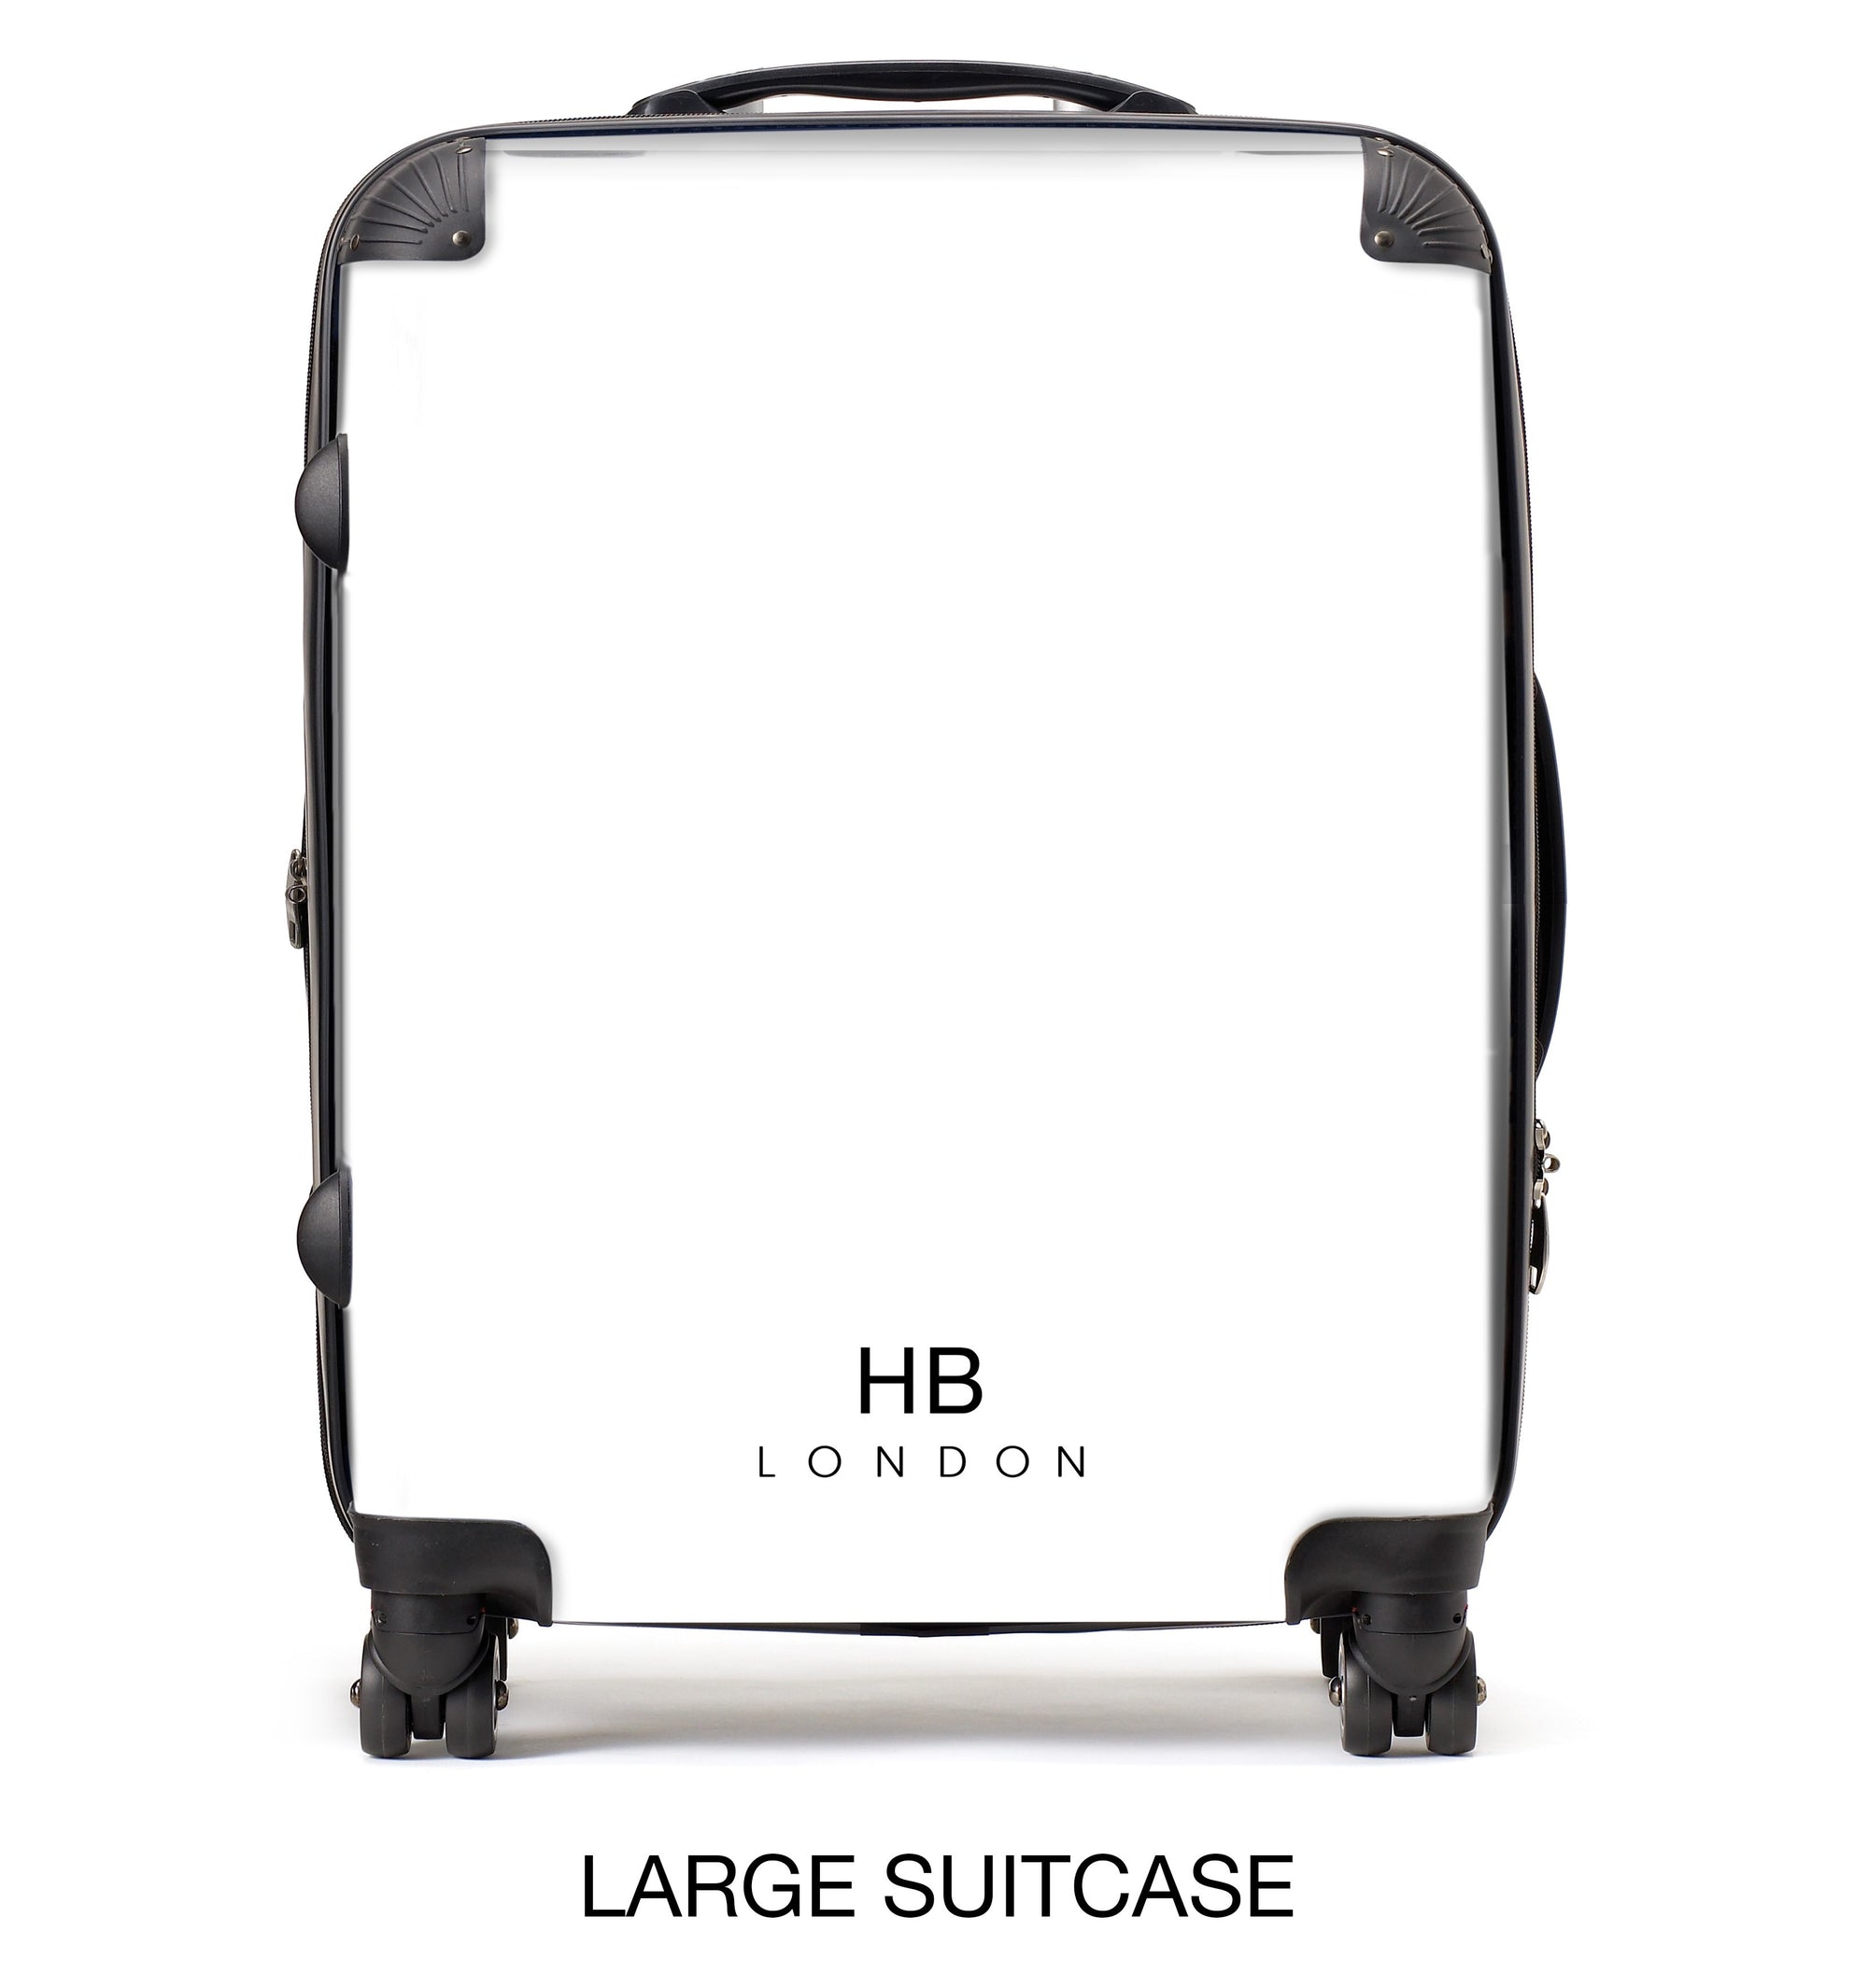 Personalised Black with Pink Font Initial Suitcase - HB LONDON